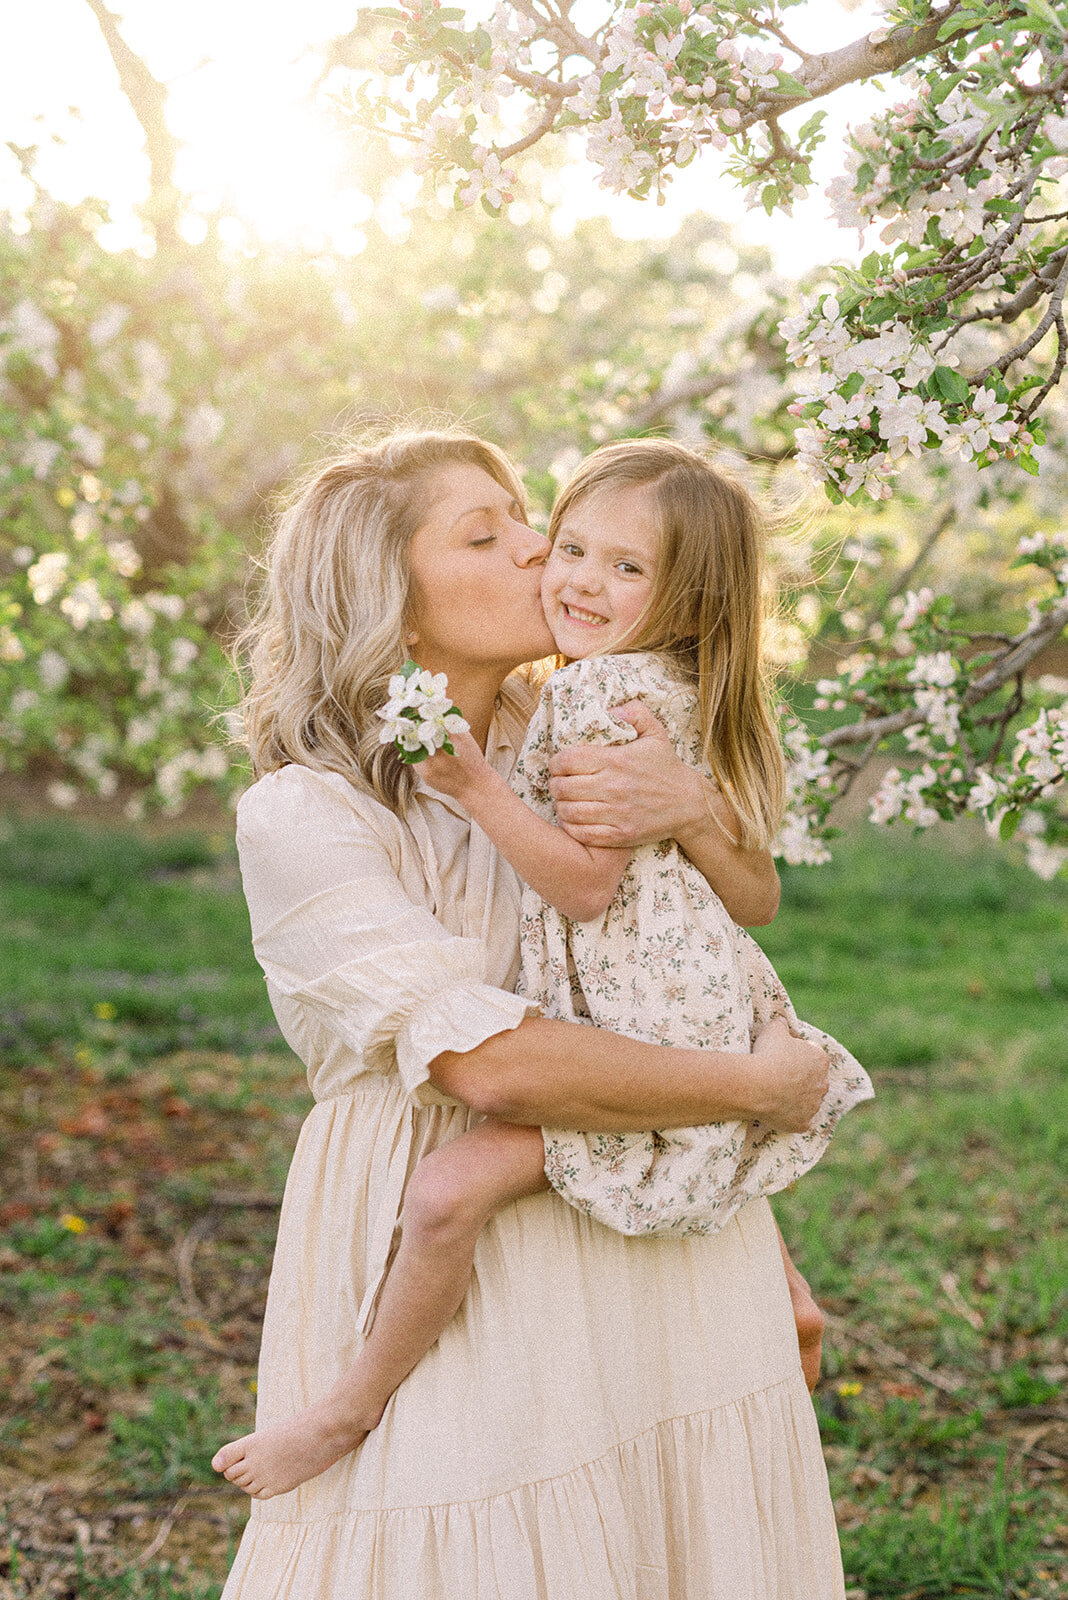 Mom kissing young daughter